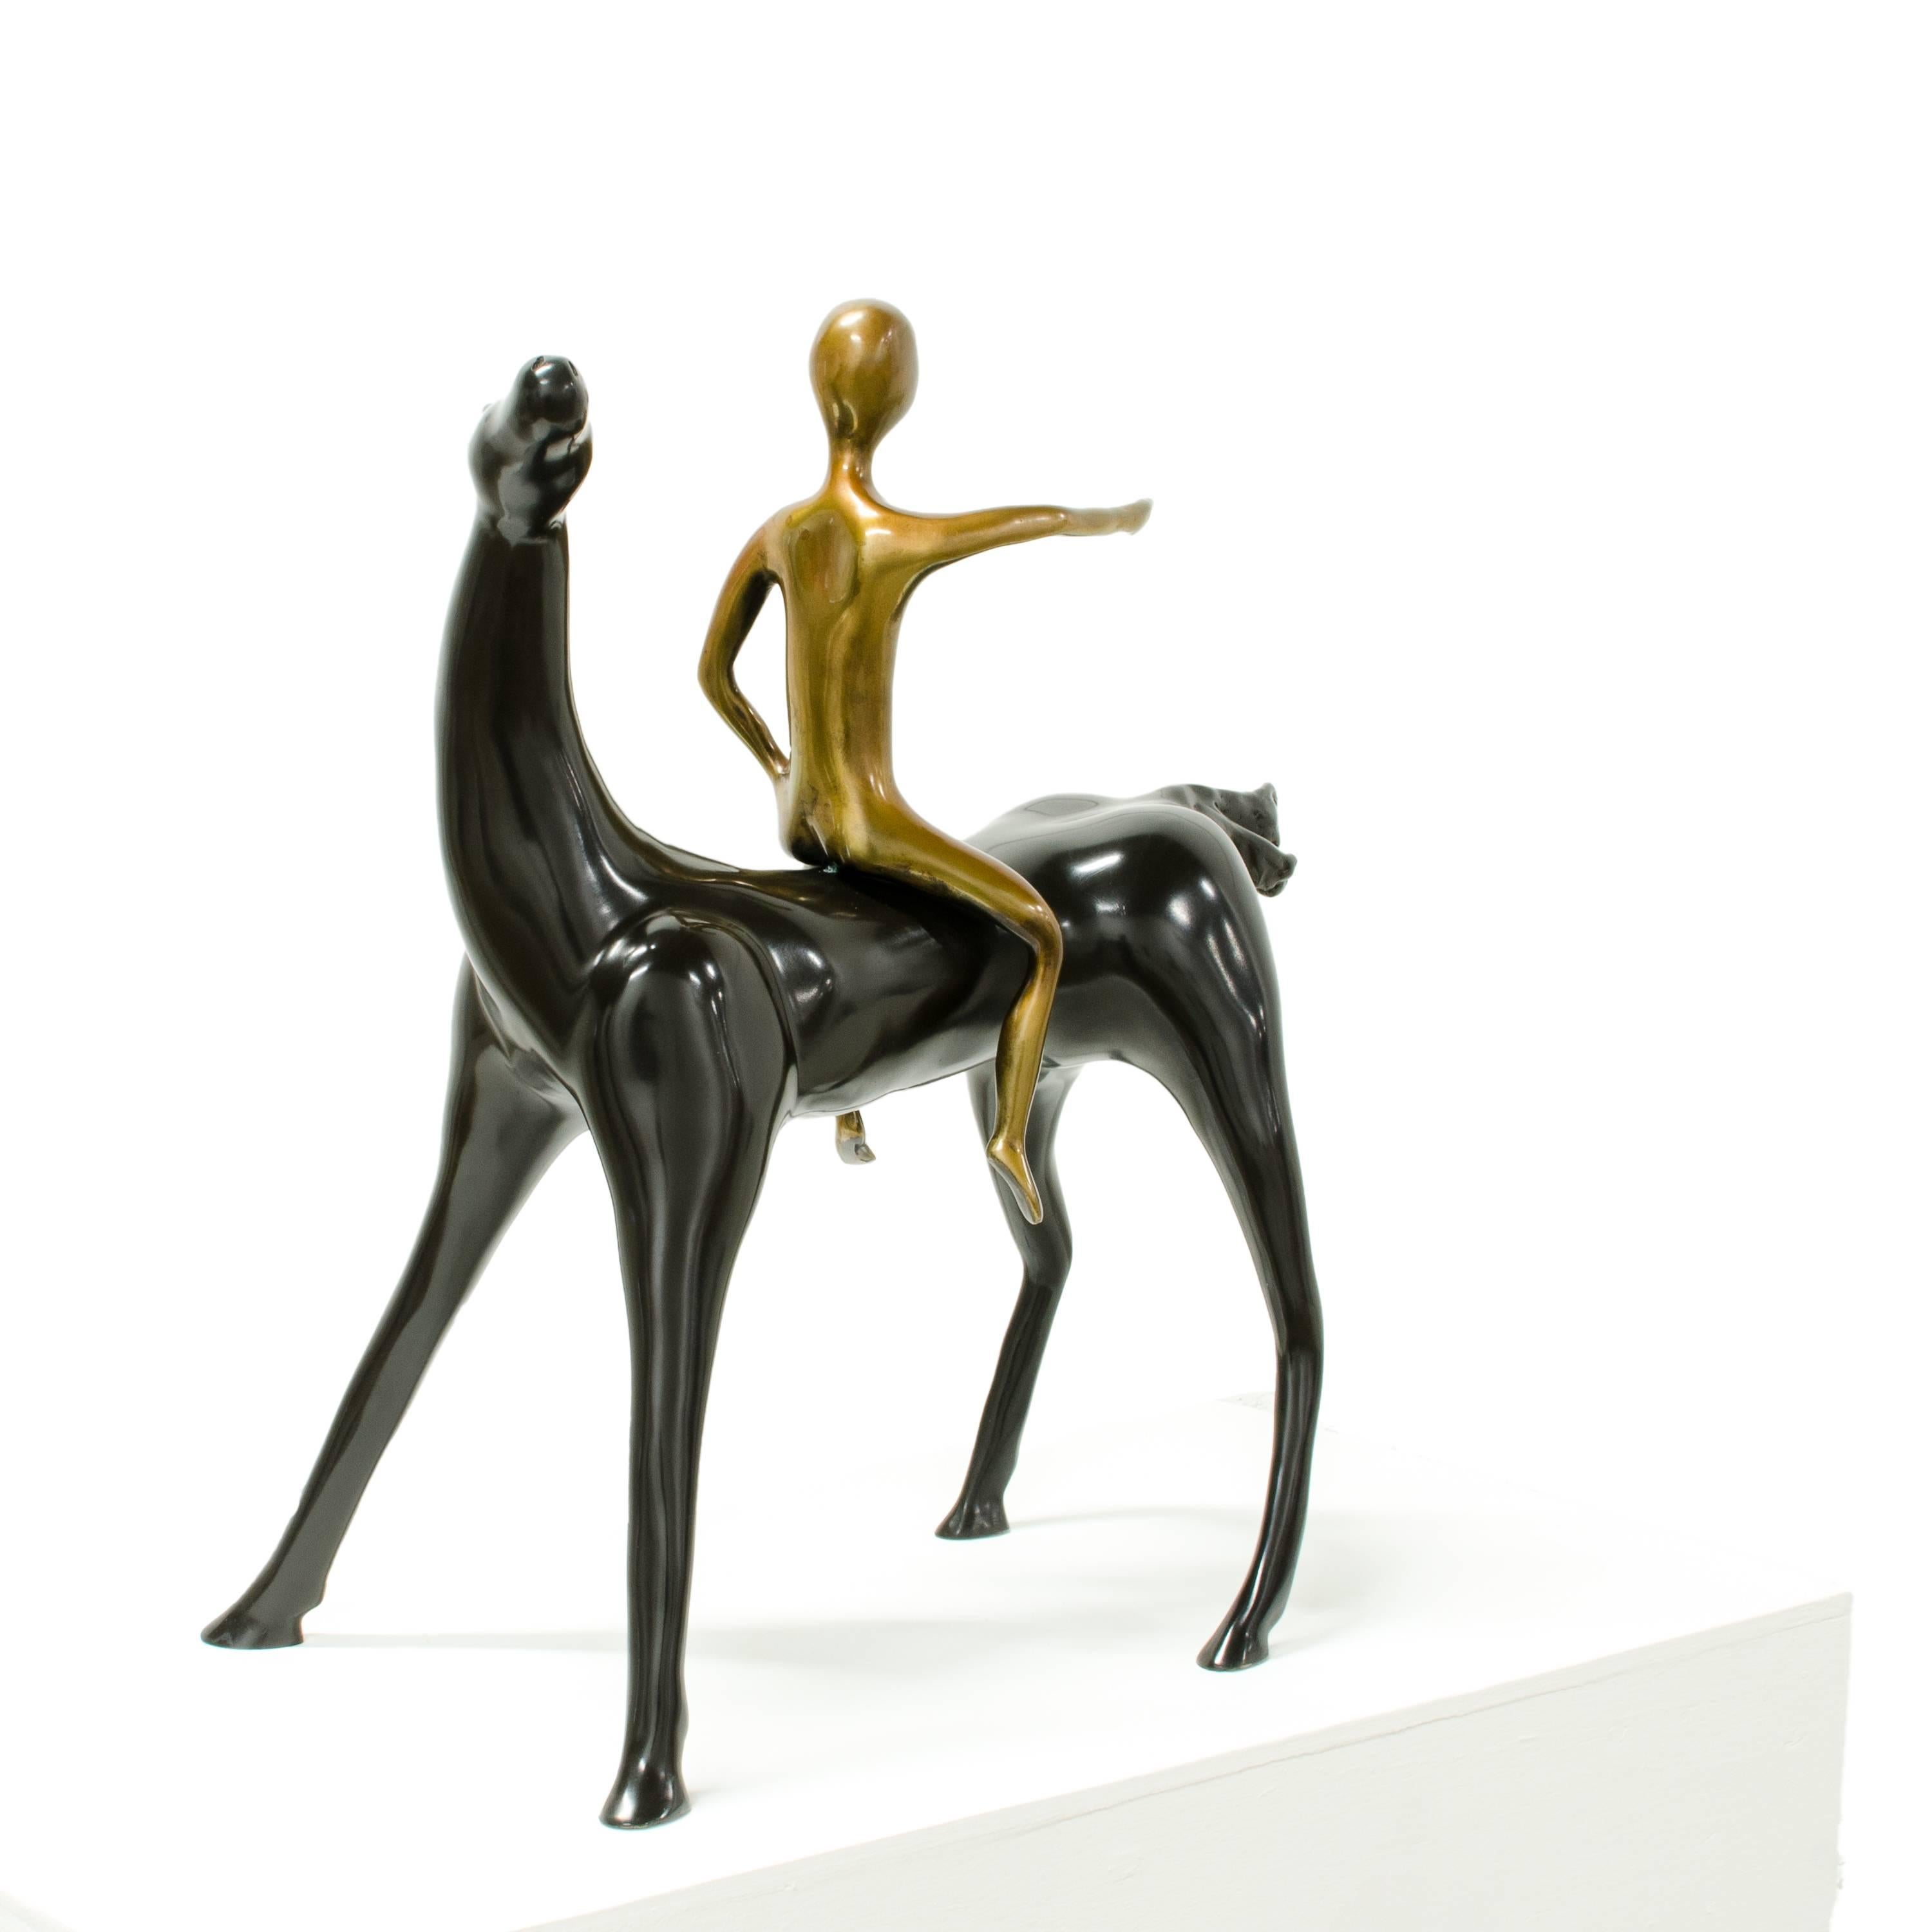 That Way! The disagreement of the horse and the rider. - Sculpture by Beatriz Gerenstein